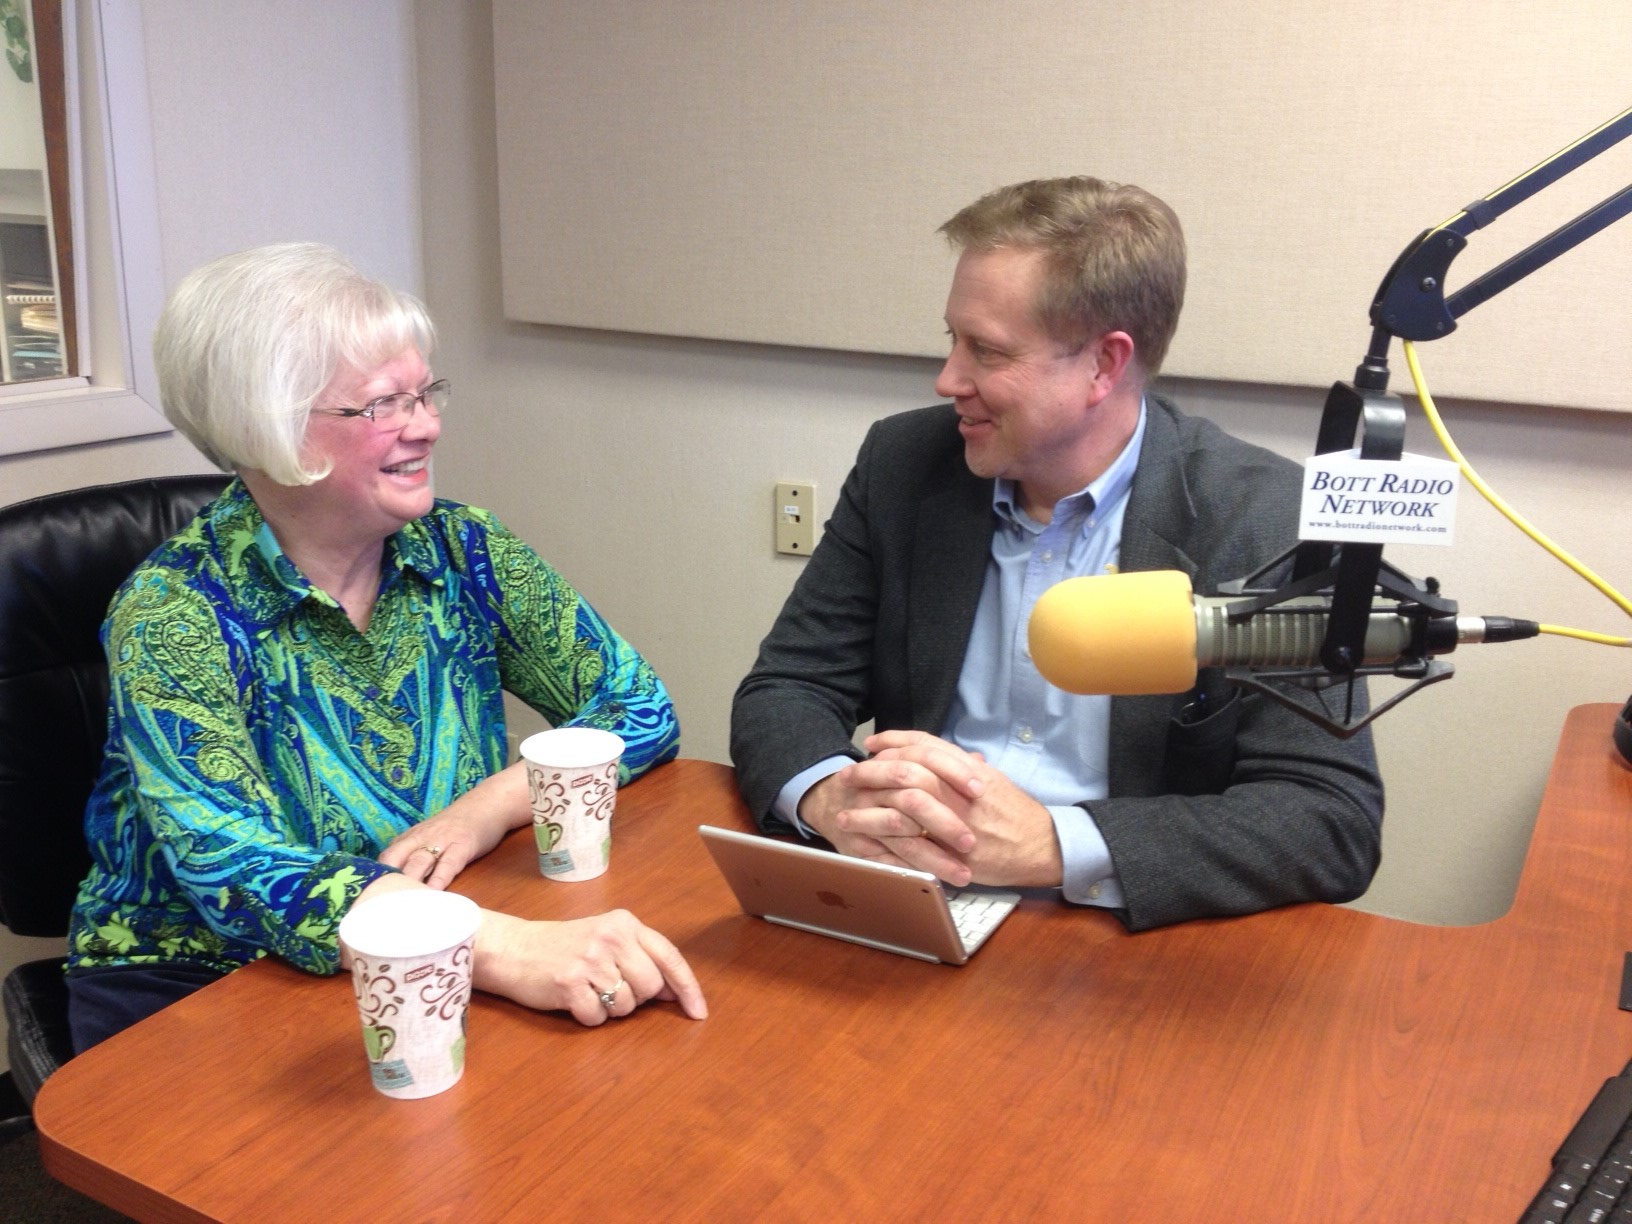 Kay Meyer with Rev. Mark Frith in the studio. Rev. Frith is the chairman of Family Shield Ministries